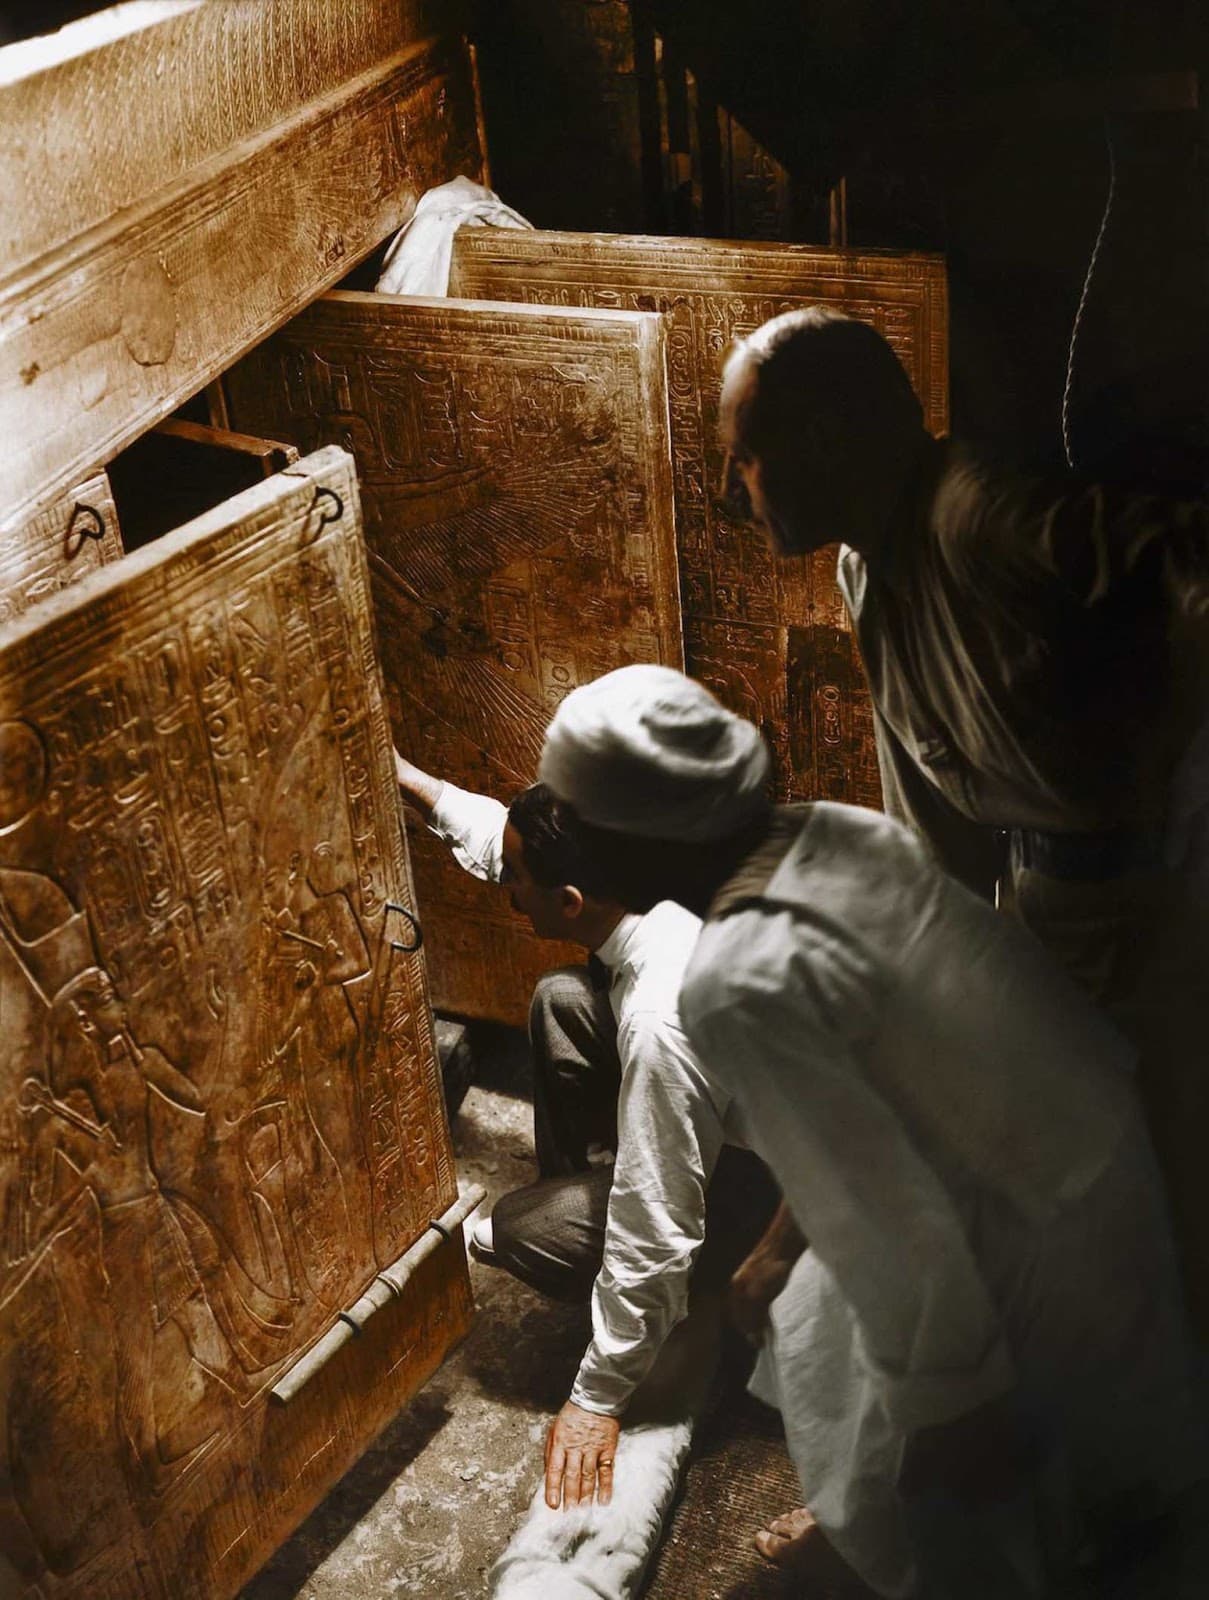 Howard Carter, Arthur Callender, and an unidentified Egyptian worker open the inner chamber and see King Tut’s sarcophagus for the first time